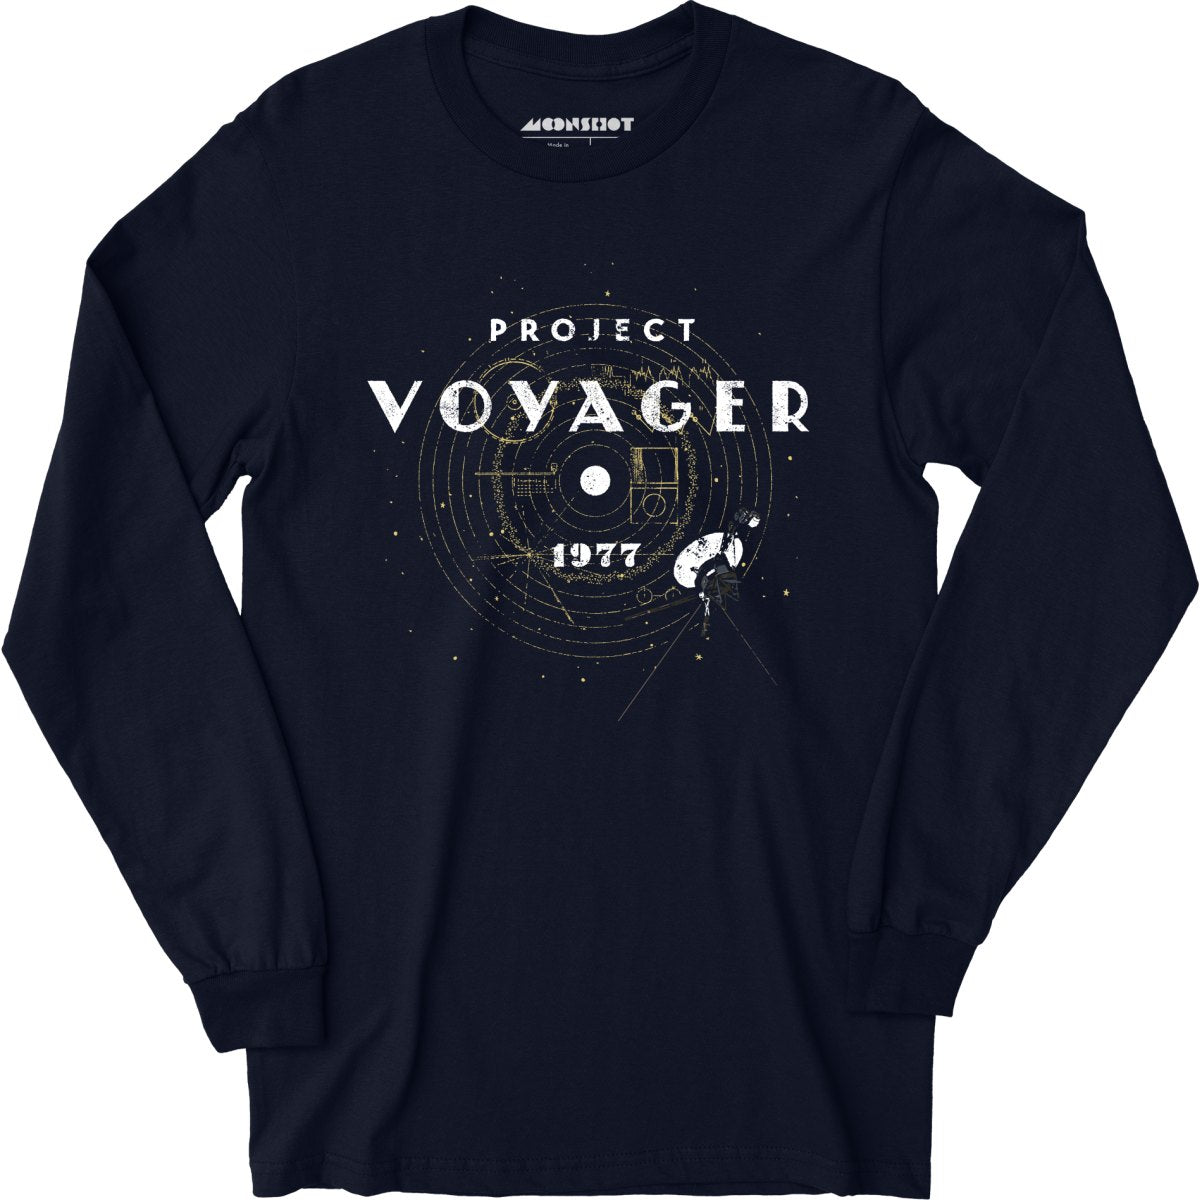 Project Voyager Mission - Golden Record - Long Sleeve T-Shirt